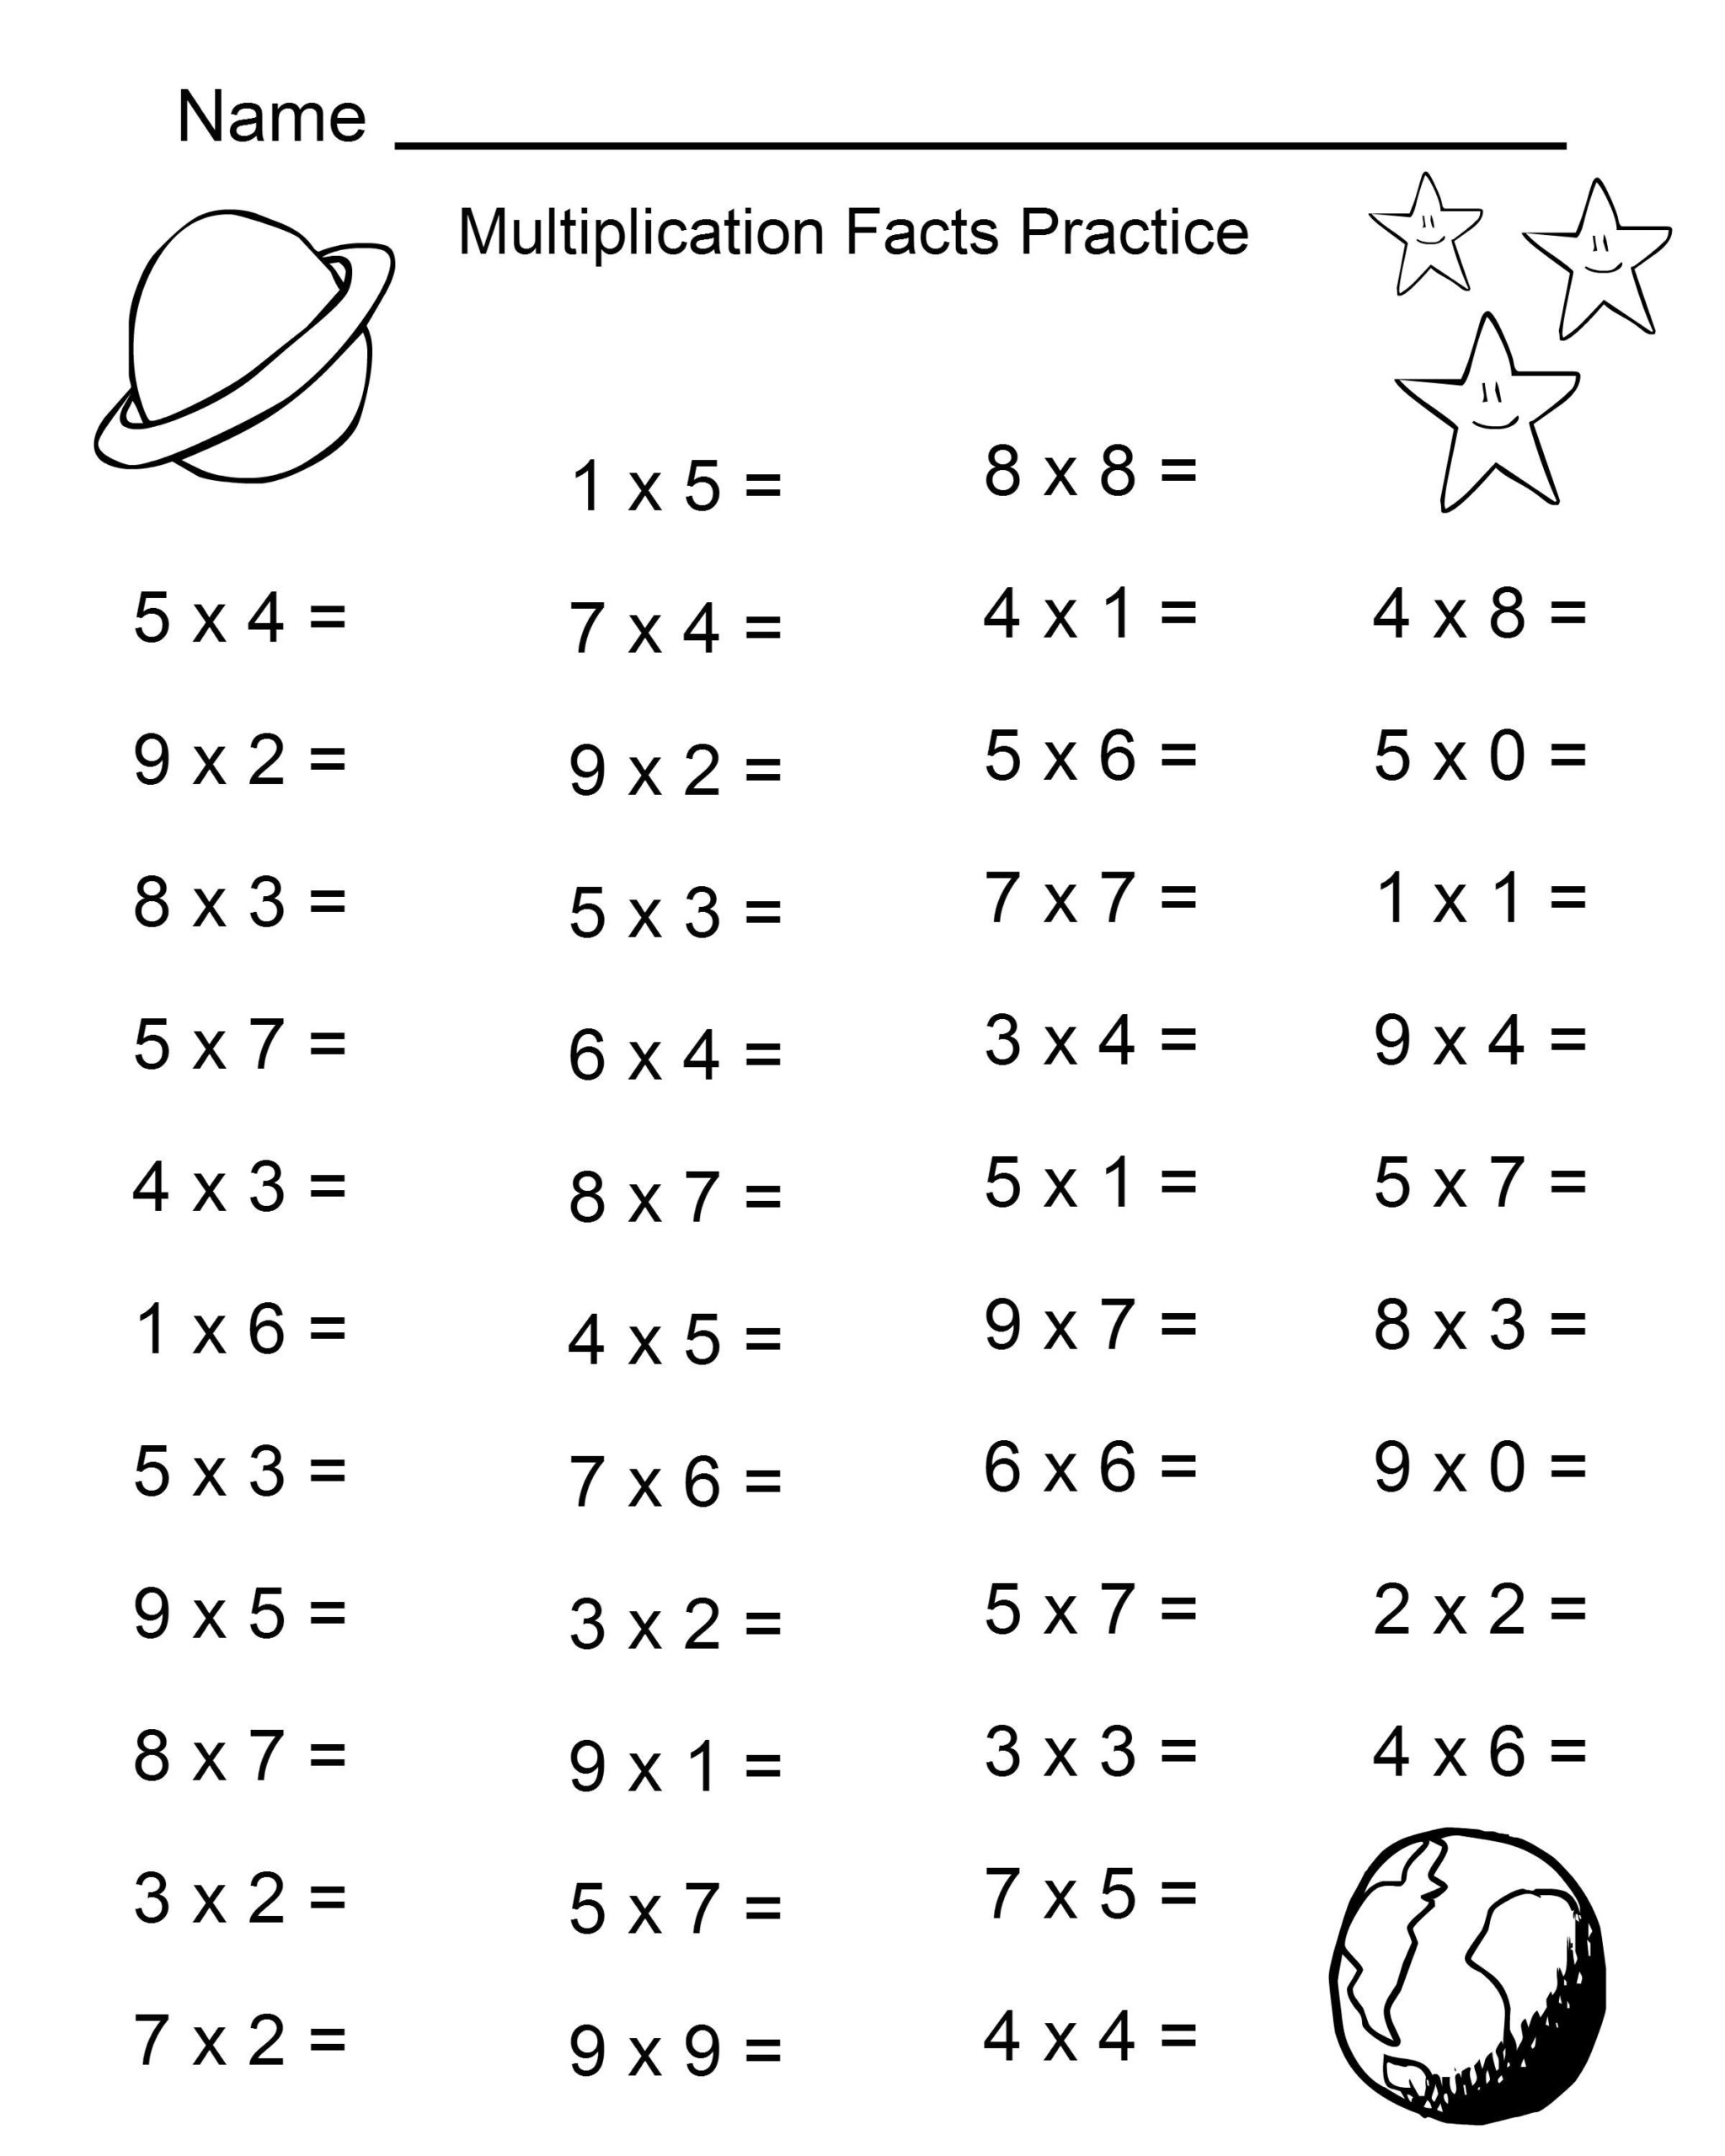 Free Multiplication Facts Practice Worksheets | Printable inside Multiplication Worksheets K12